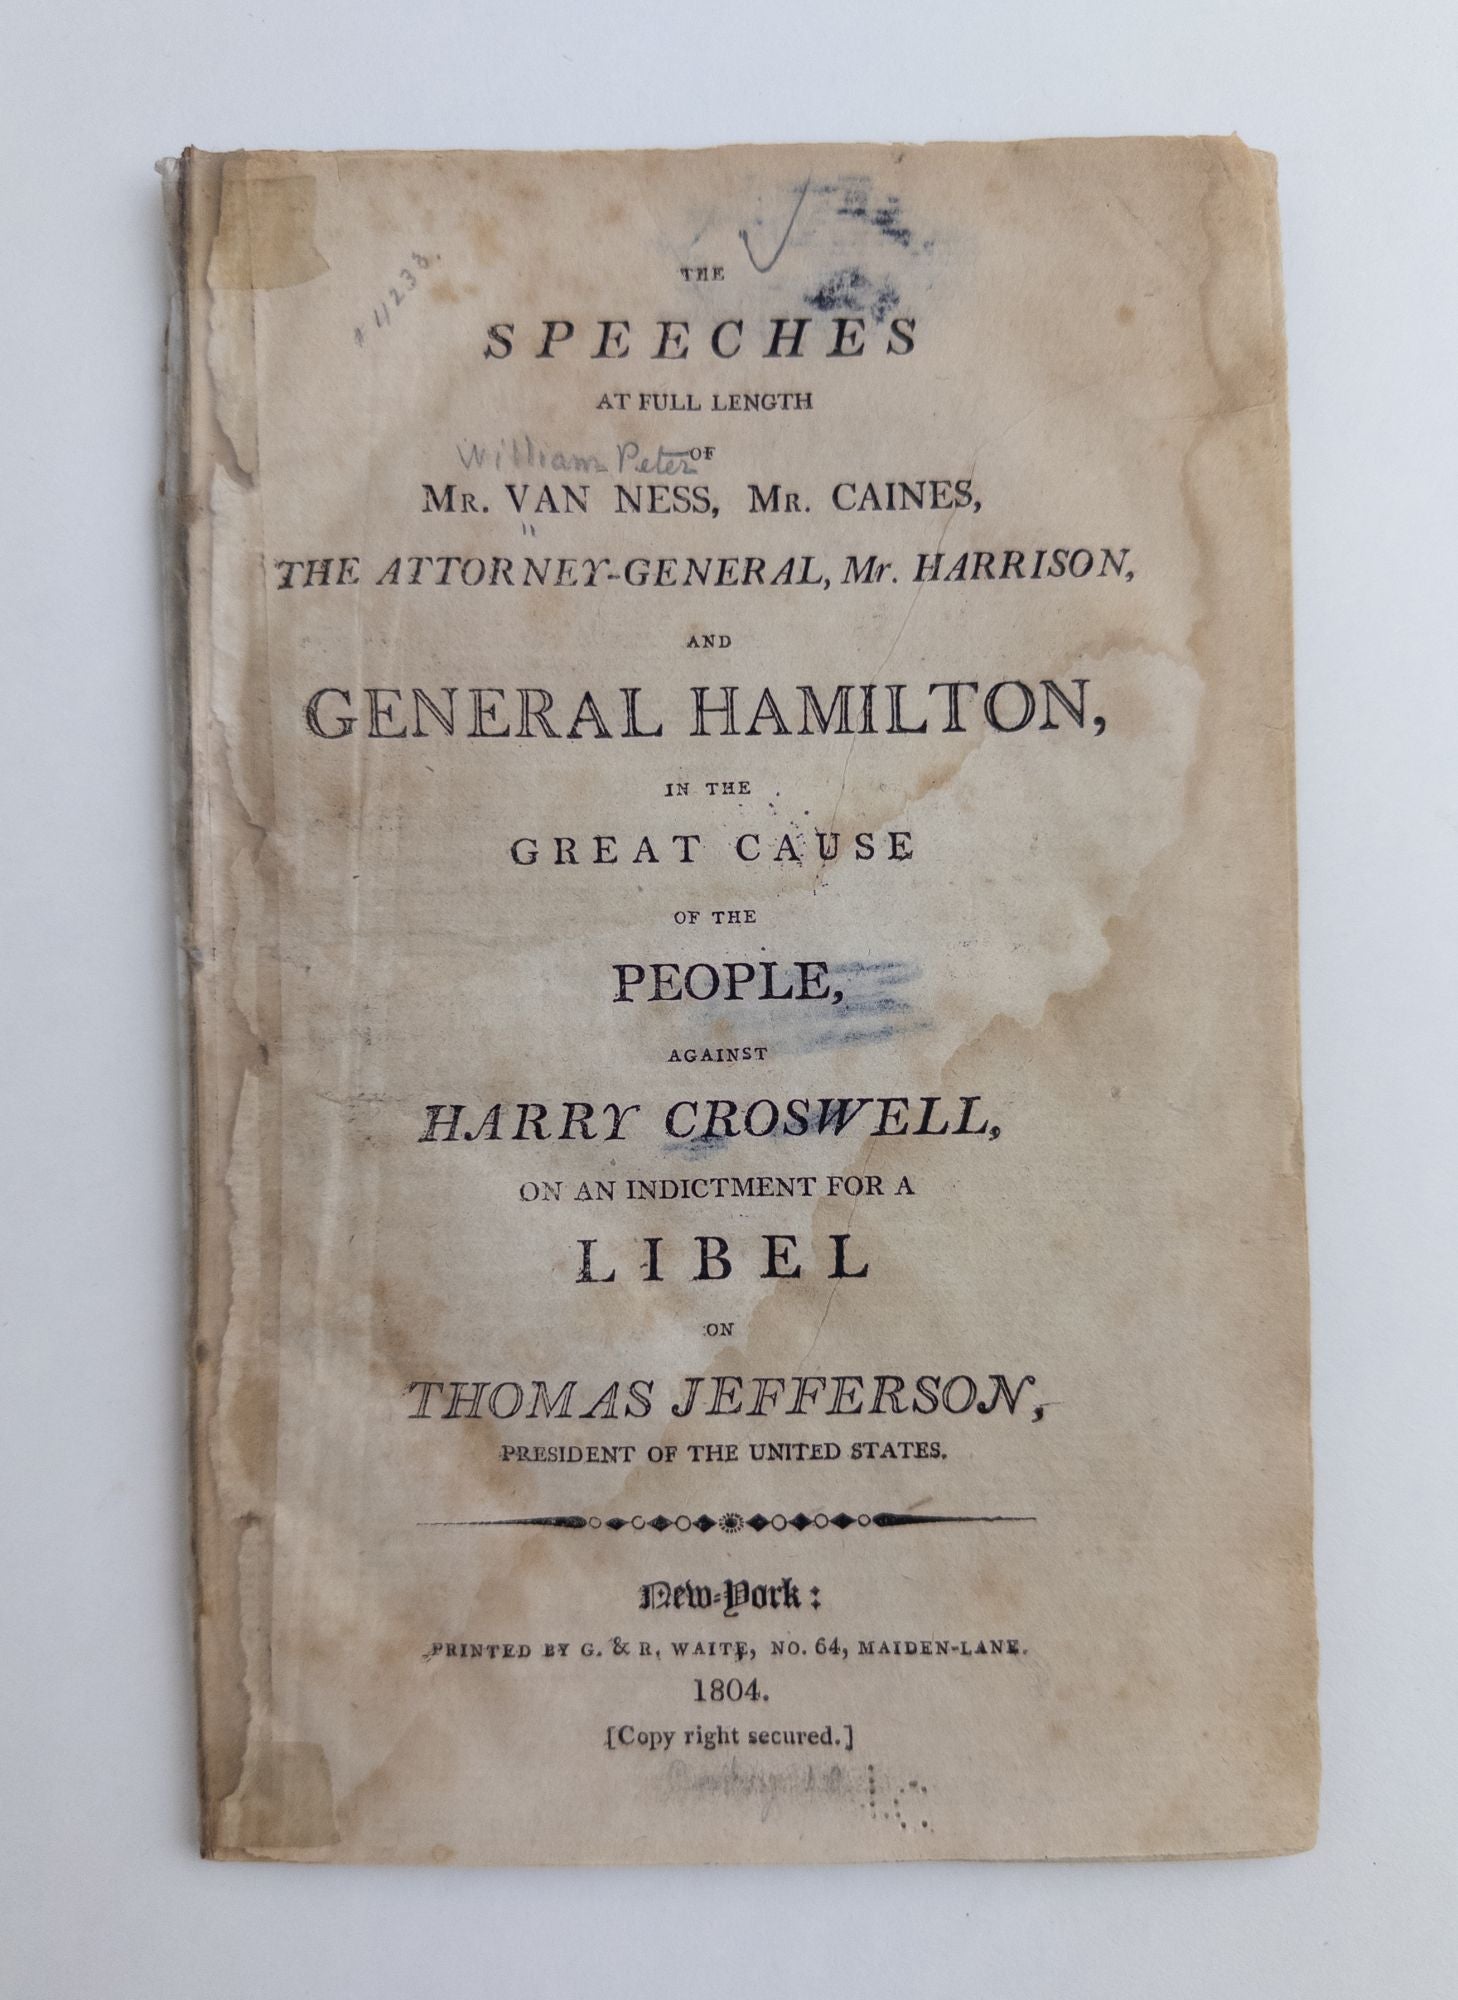 Product Image for THE SPEECHES AT FULL LENGTH OF MR. VAN NESS, MR. CAINES, THE ATTORNEY-GENERAL, MR. HARRISON, AND GENERAL HAMILTON, IN THE GREAT CAUSE OF THE PEOPLE, AGAINST HARRY CROSWELL, ON AN INDICTMENT FOR A LIBEL ON THOMAS JEFFERSON, PRESIDENT OF THE UNITED STATES